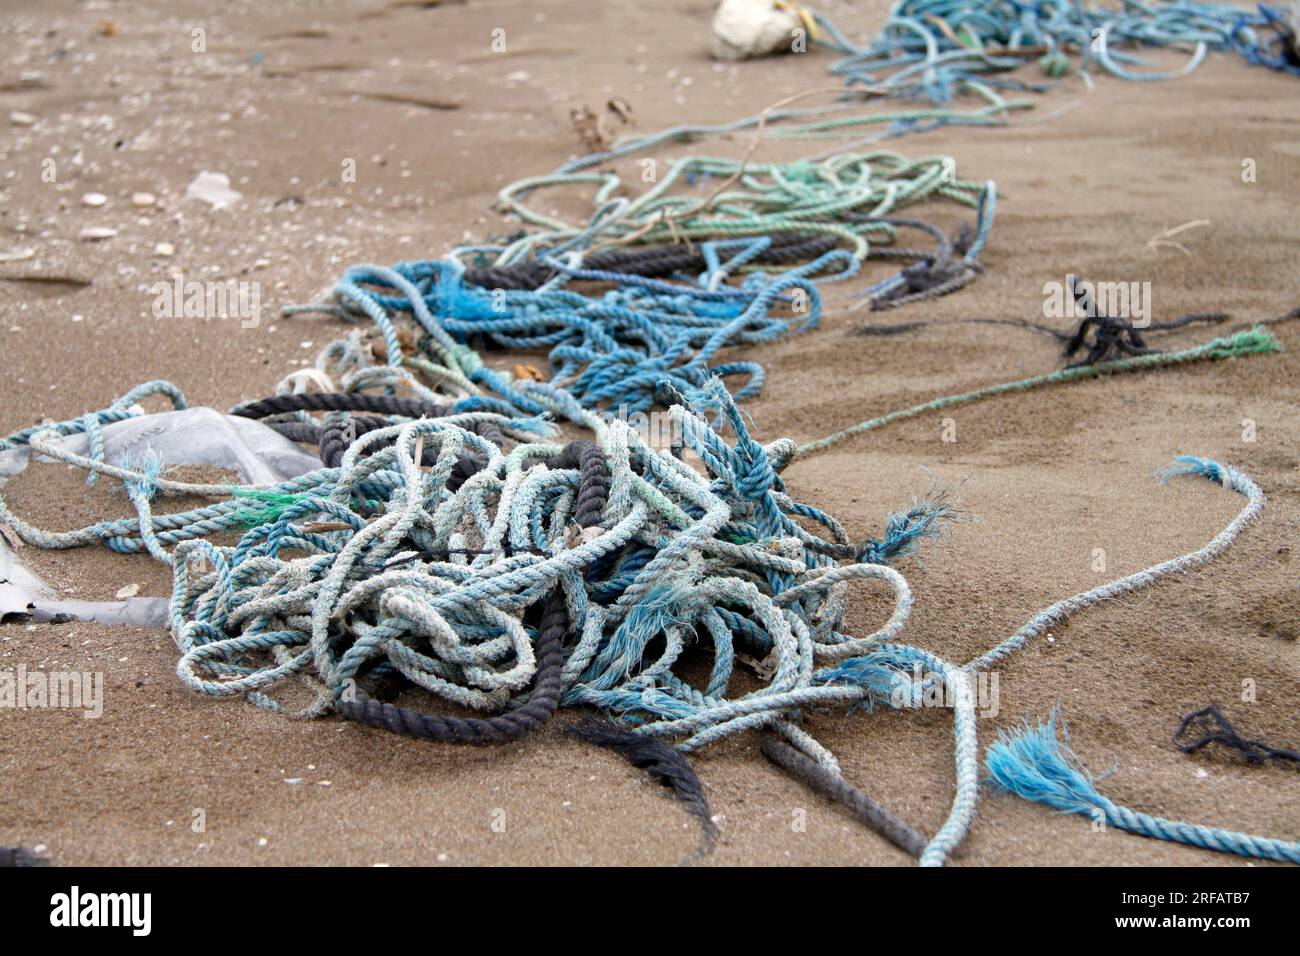 The pollution of beaches with waste poses a significant threat to marine life. This includes hazardous materials such as plastic bags and ropes, which Stock Photo